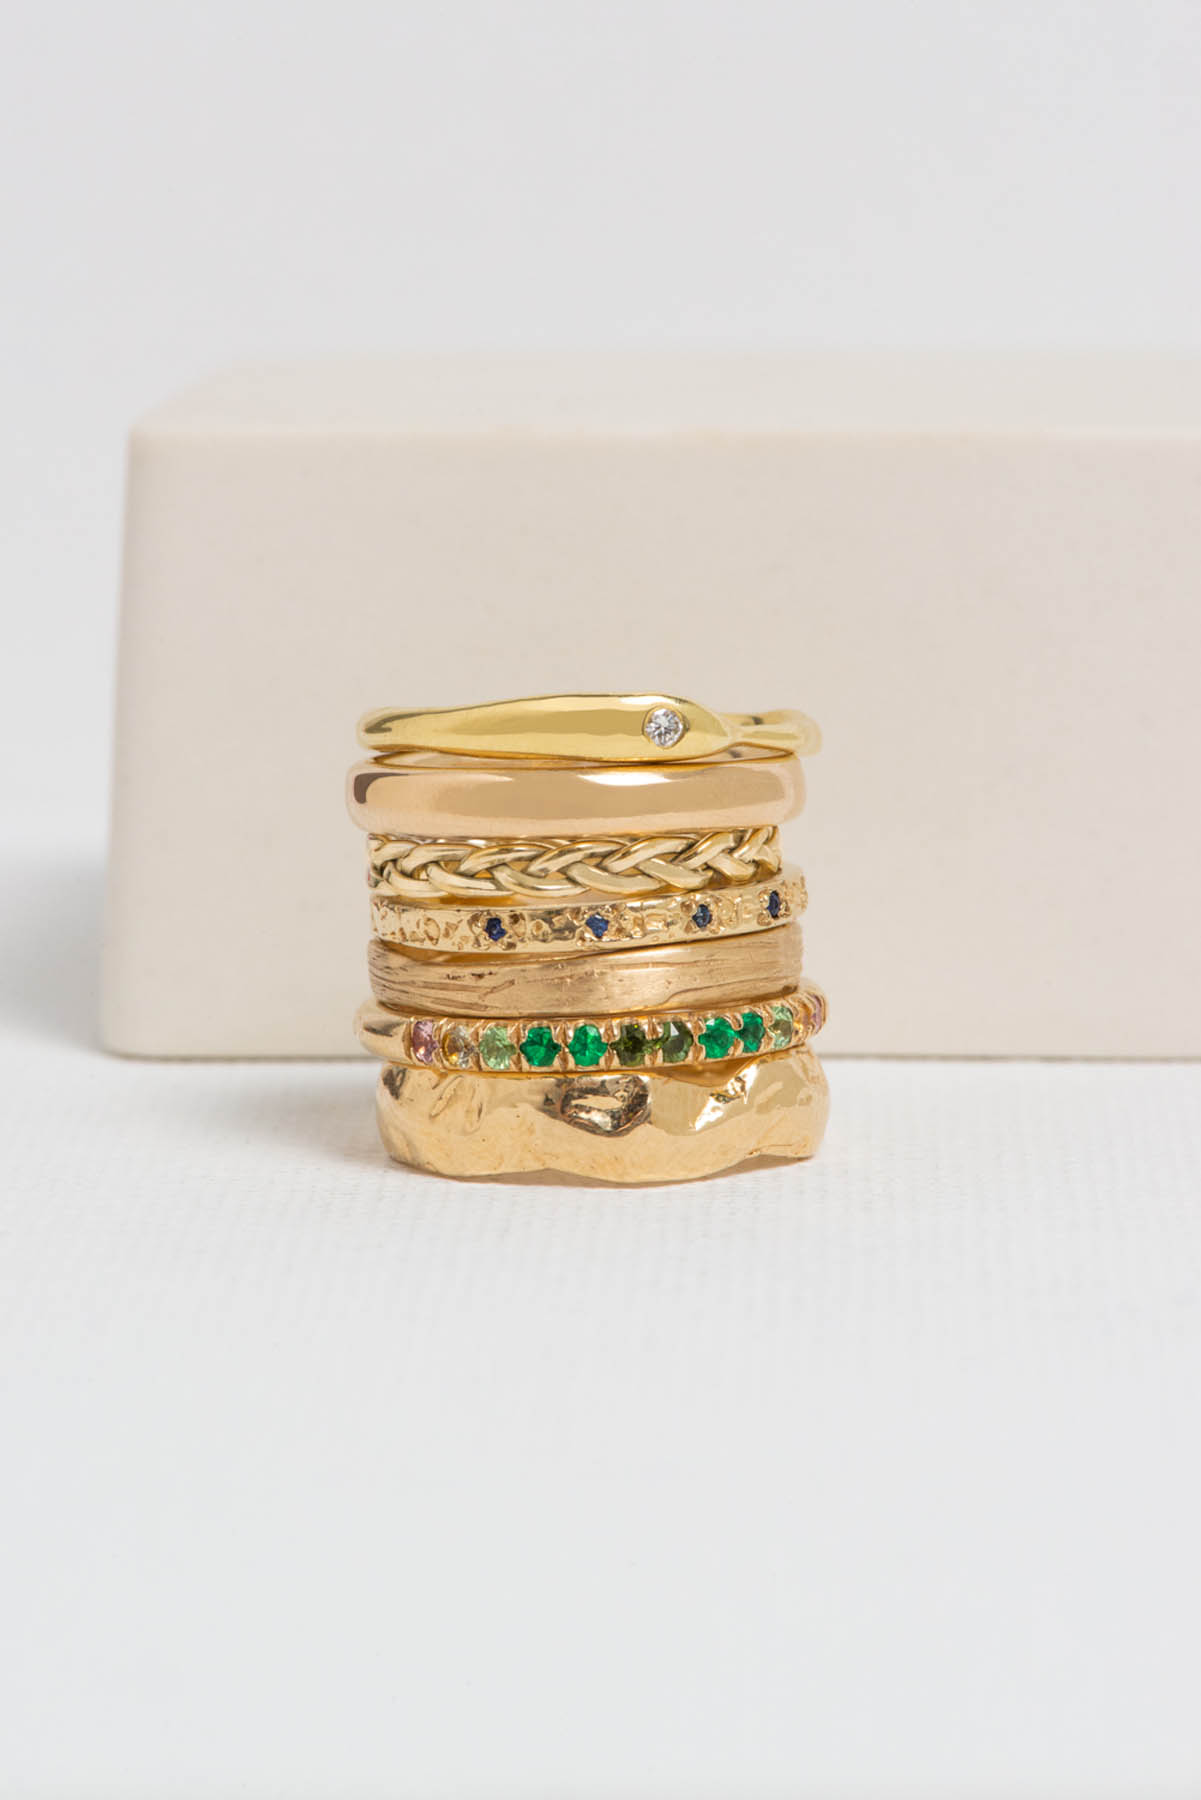 A stack of gold rings with green and clear accents.